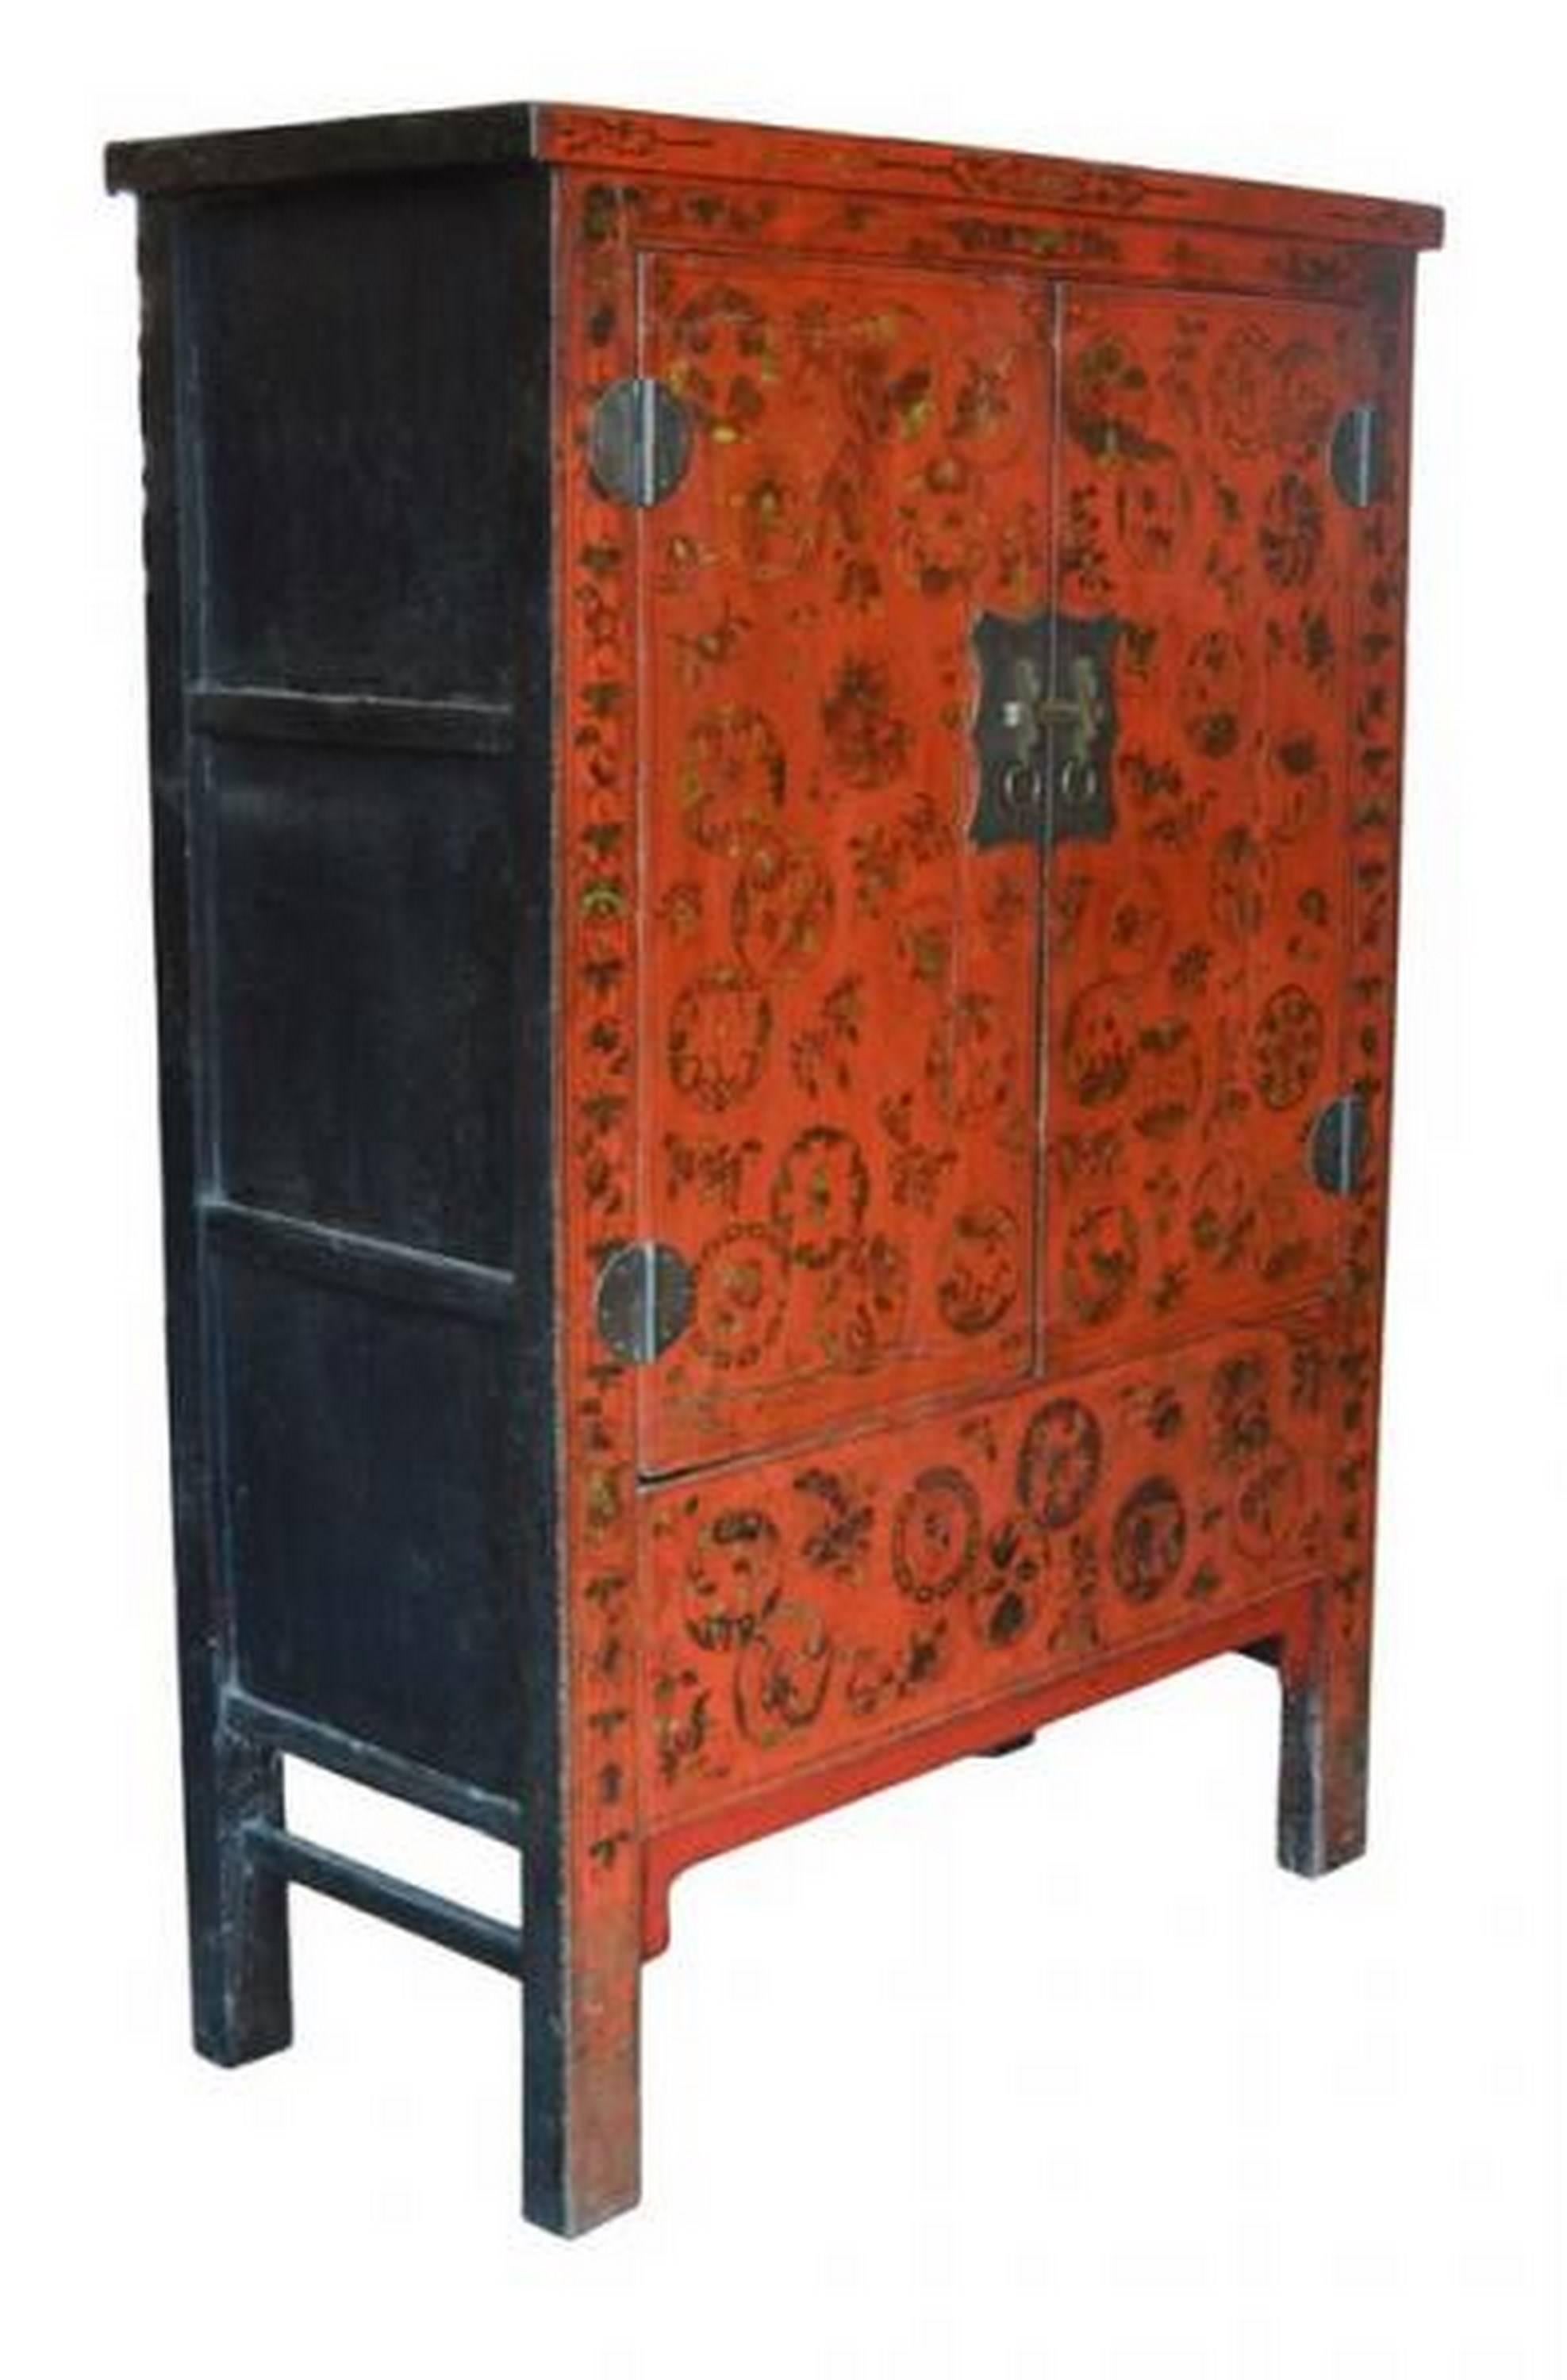 Antique Chinese red lacquer cabinet or armoire, with gold / brown chinoiserie accents, original traditional brass hardware, two interior drawers.